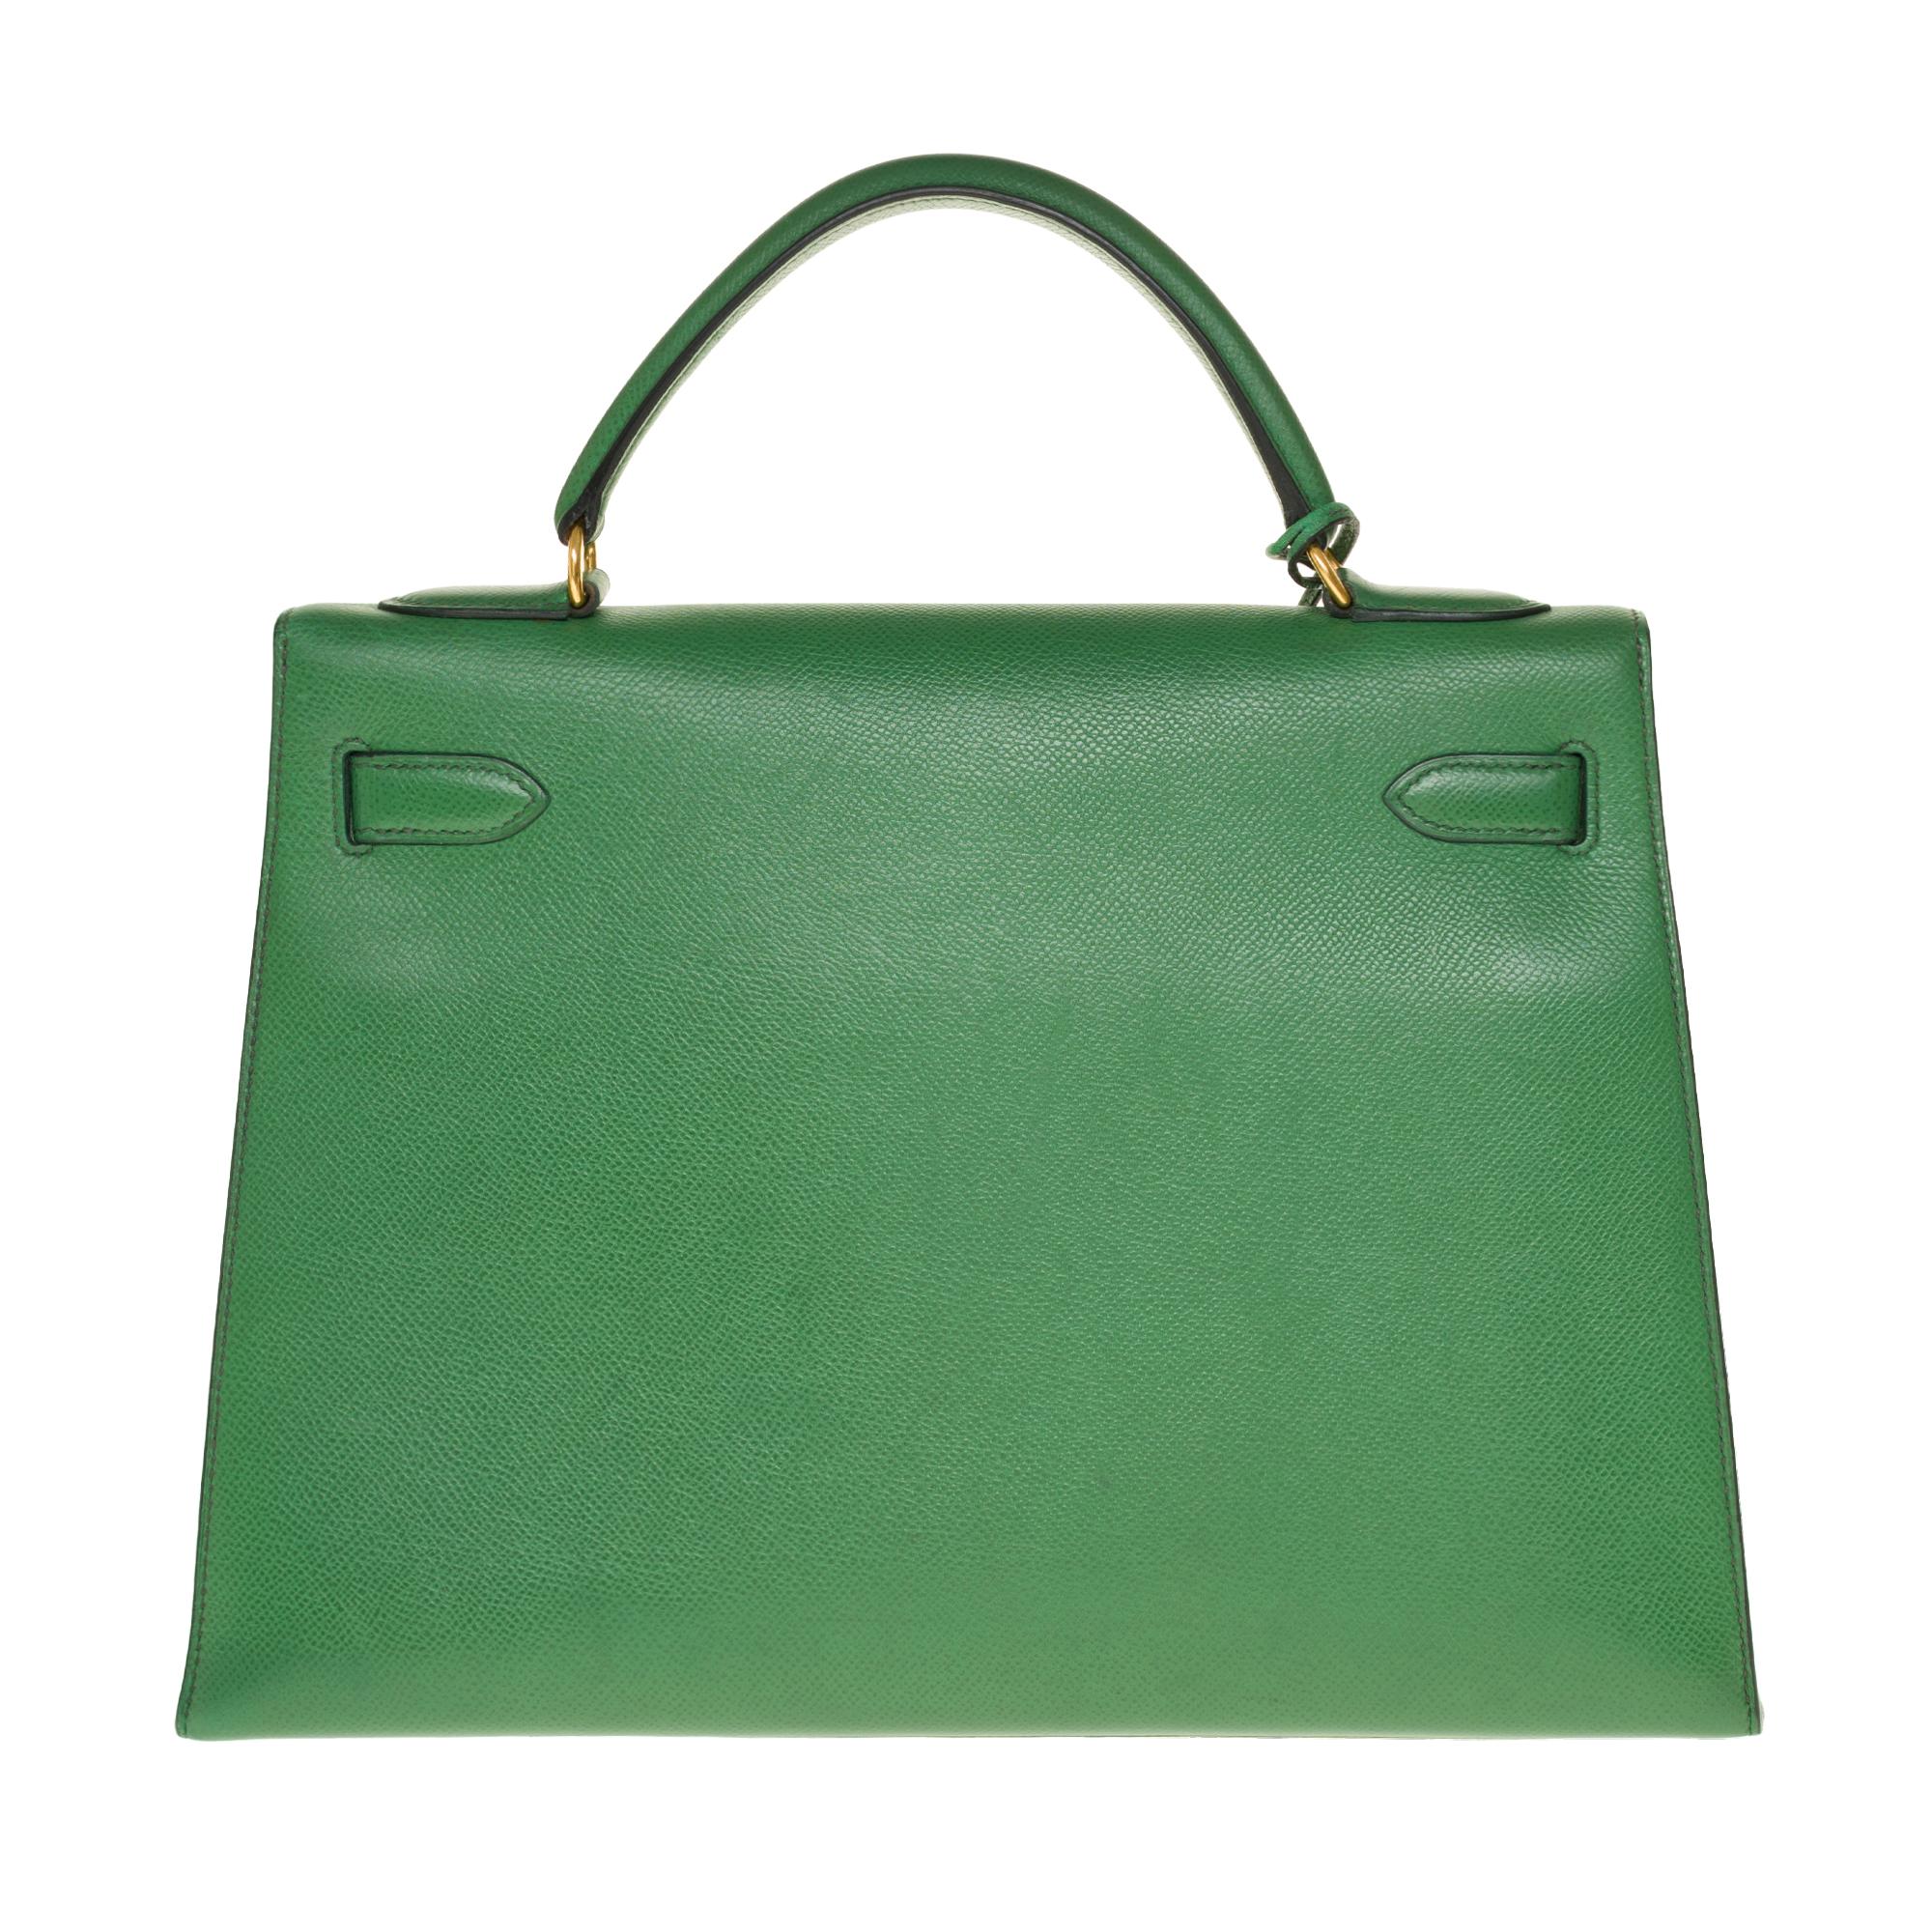 Superb & Rare handbag Hermes Kelly sellier 32 cm in green Courchevel leather, gold plated metal hardware, simple handle Courchevel green leather , a removable shoulder strap handle in green Courchevel leather allowing a hand or shoulder